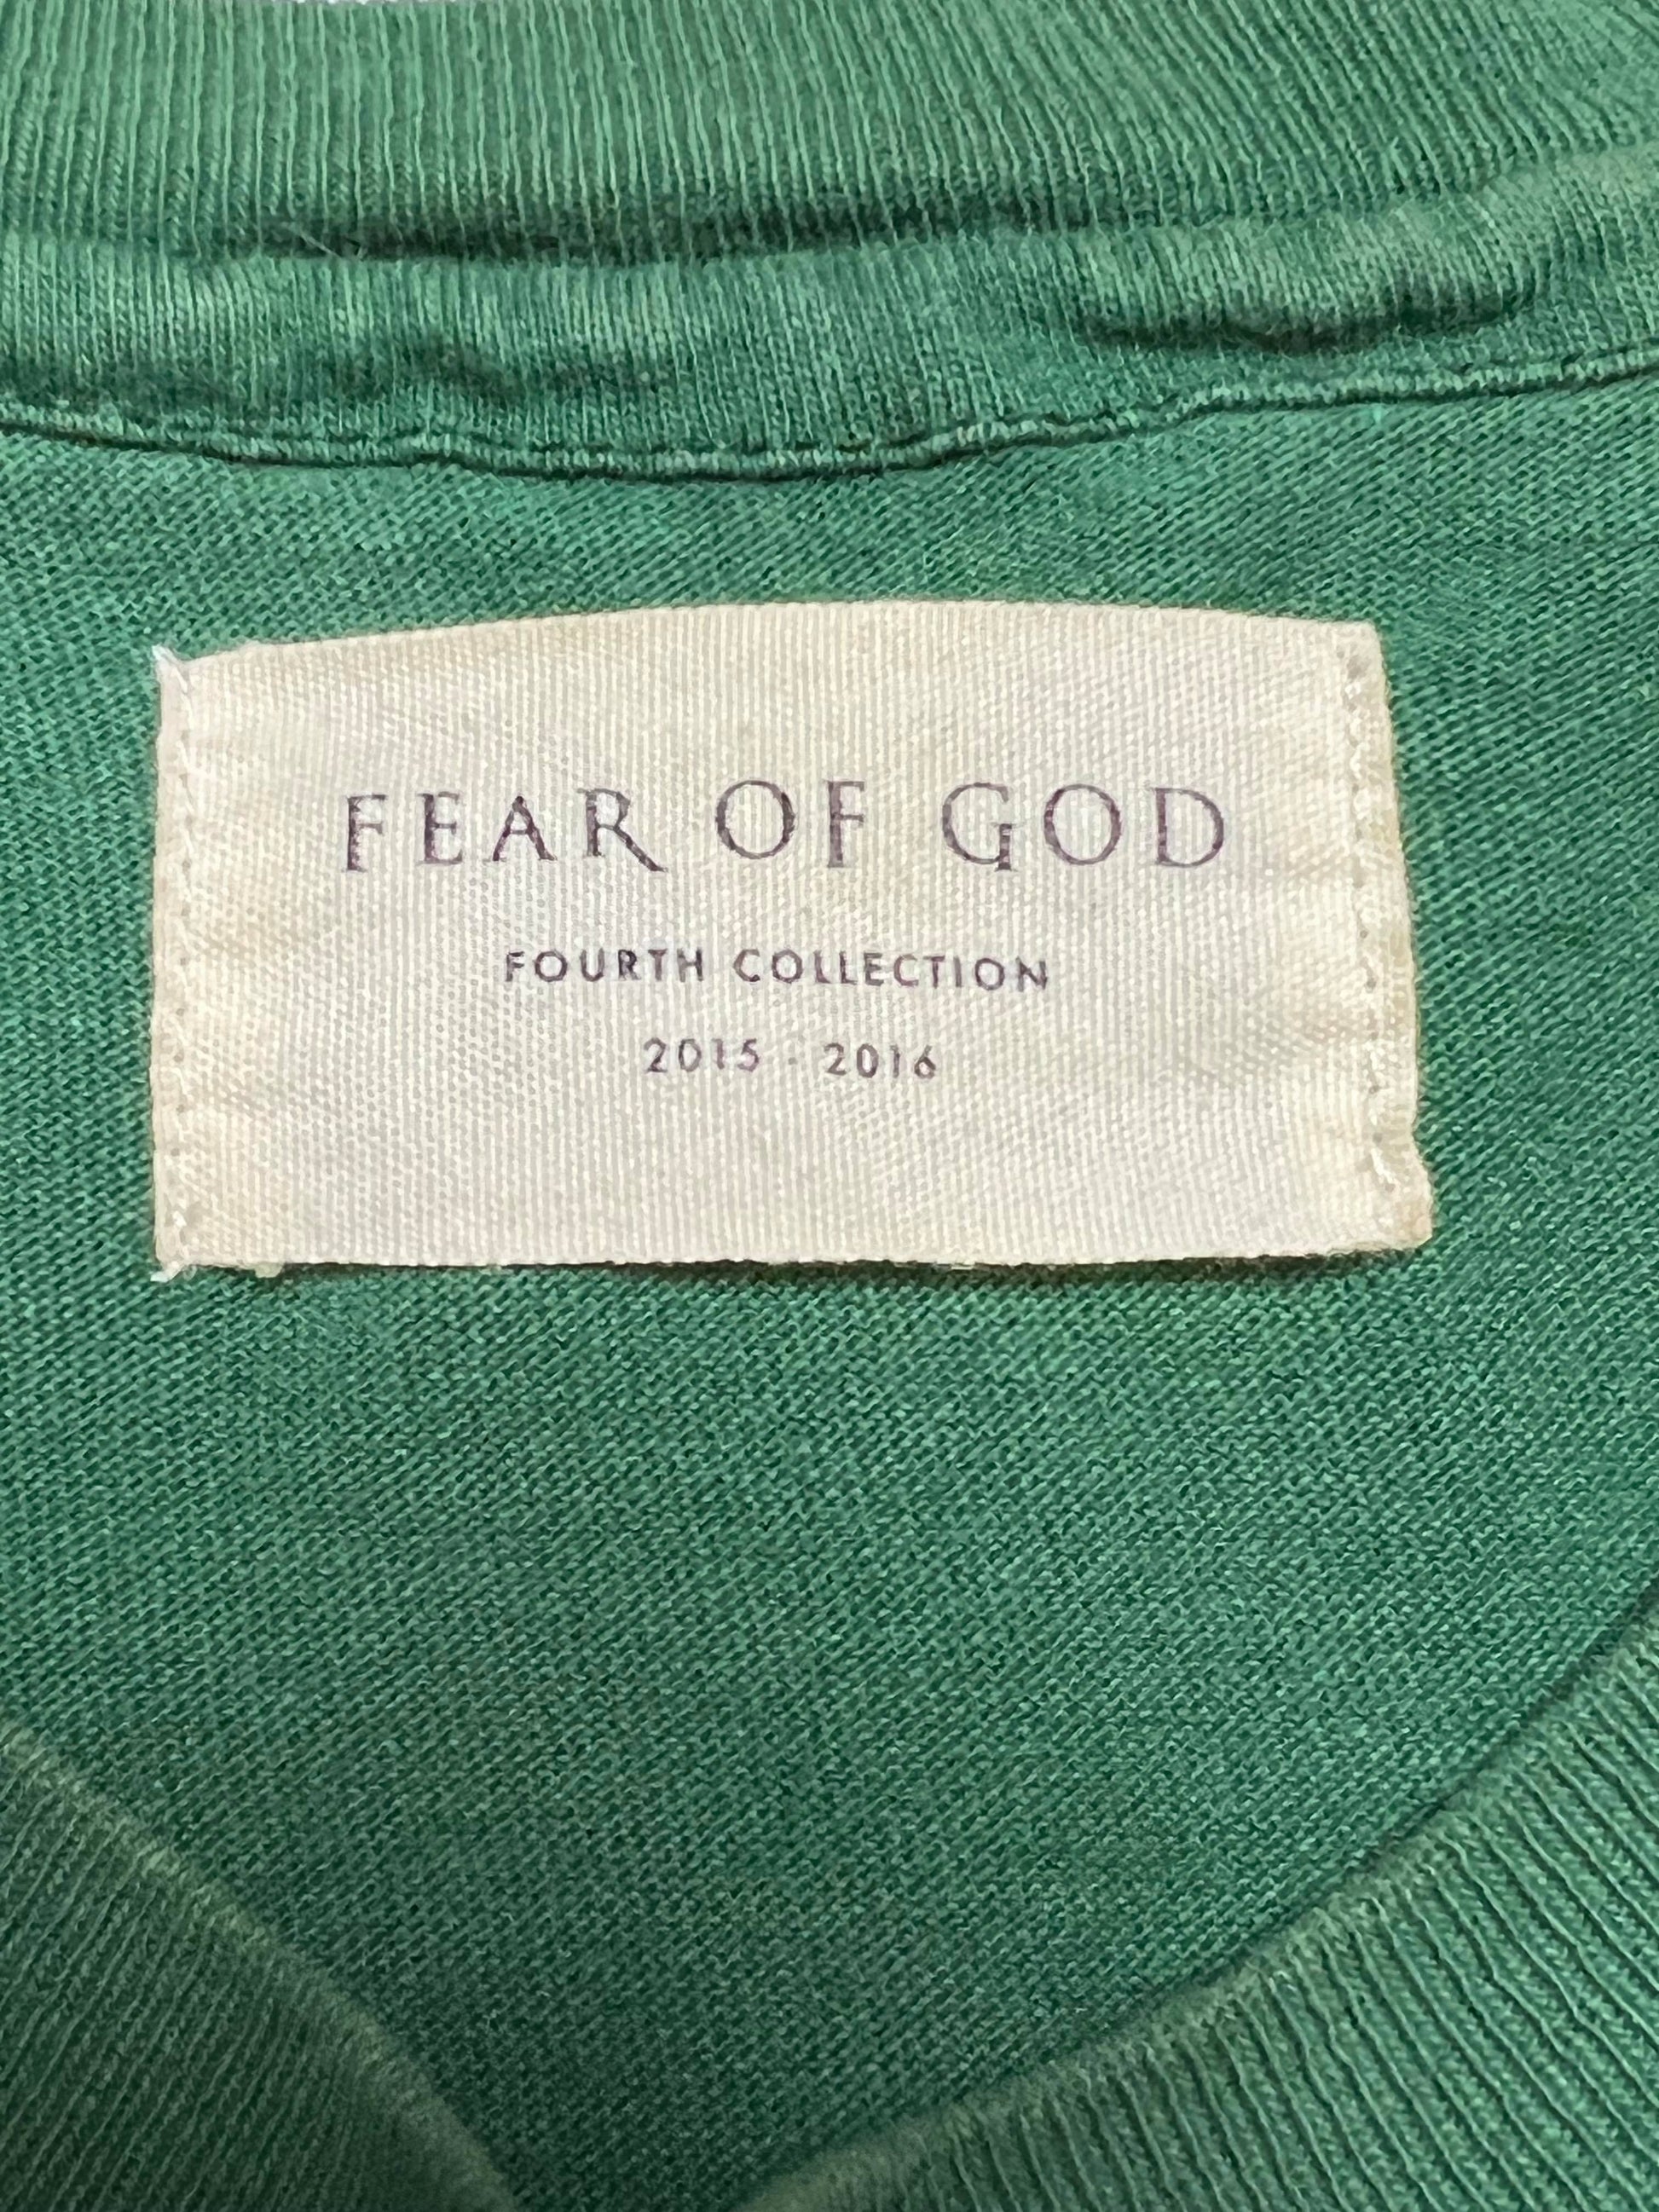 Fear of God - 2015/16 4th Collection Vintage Resurrected Pearl Jam